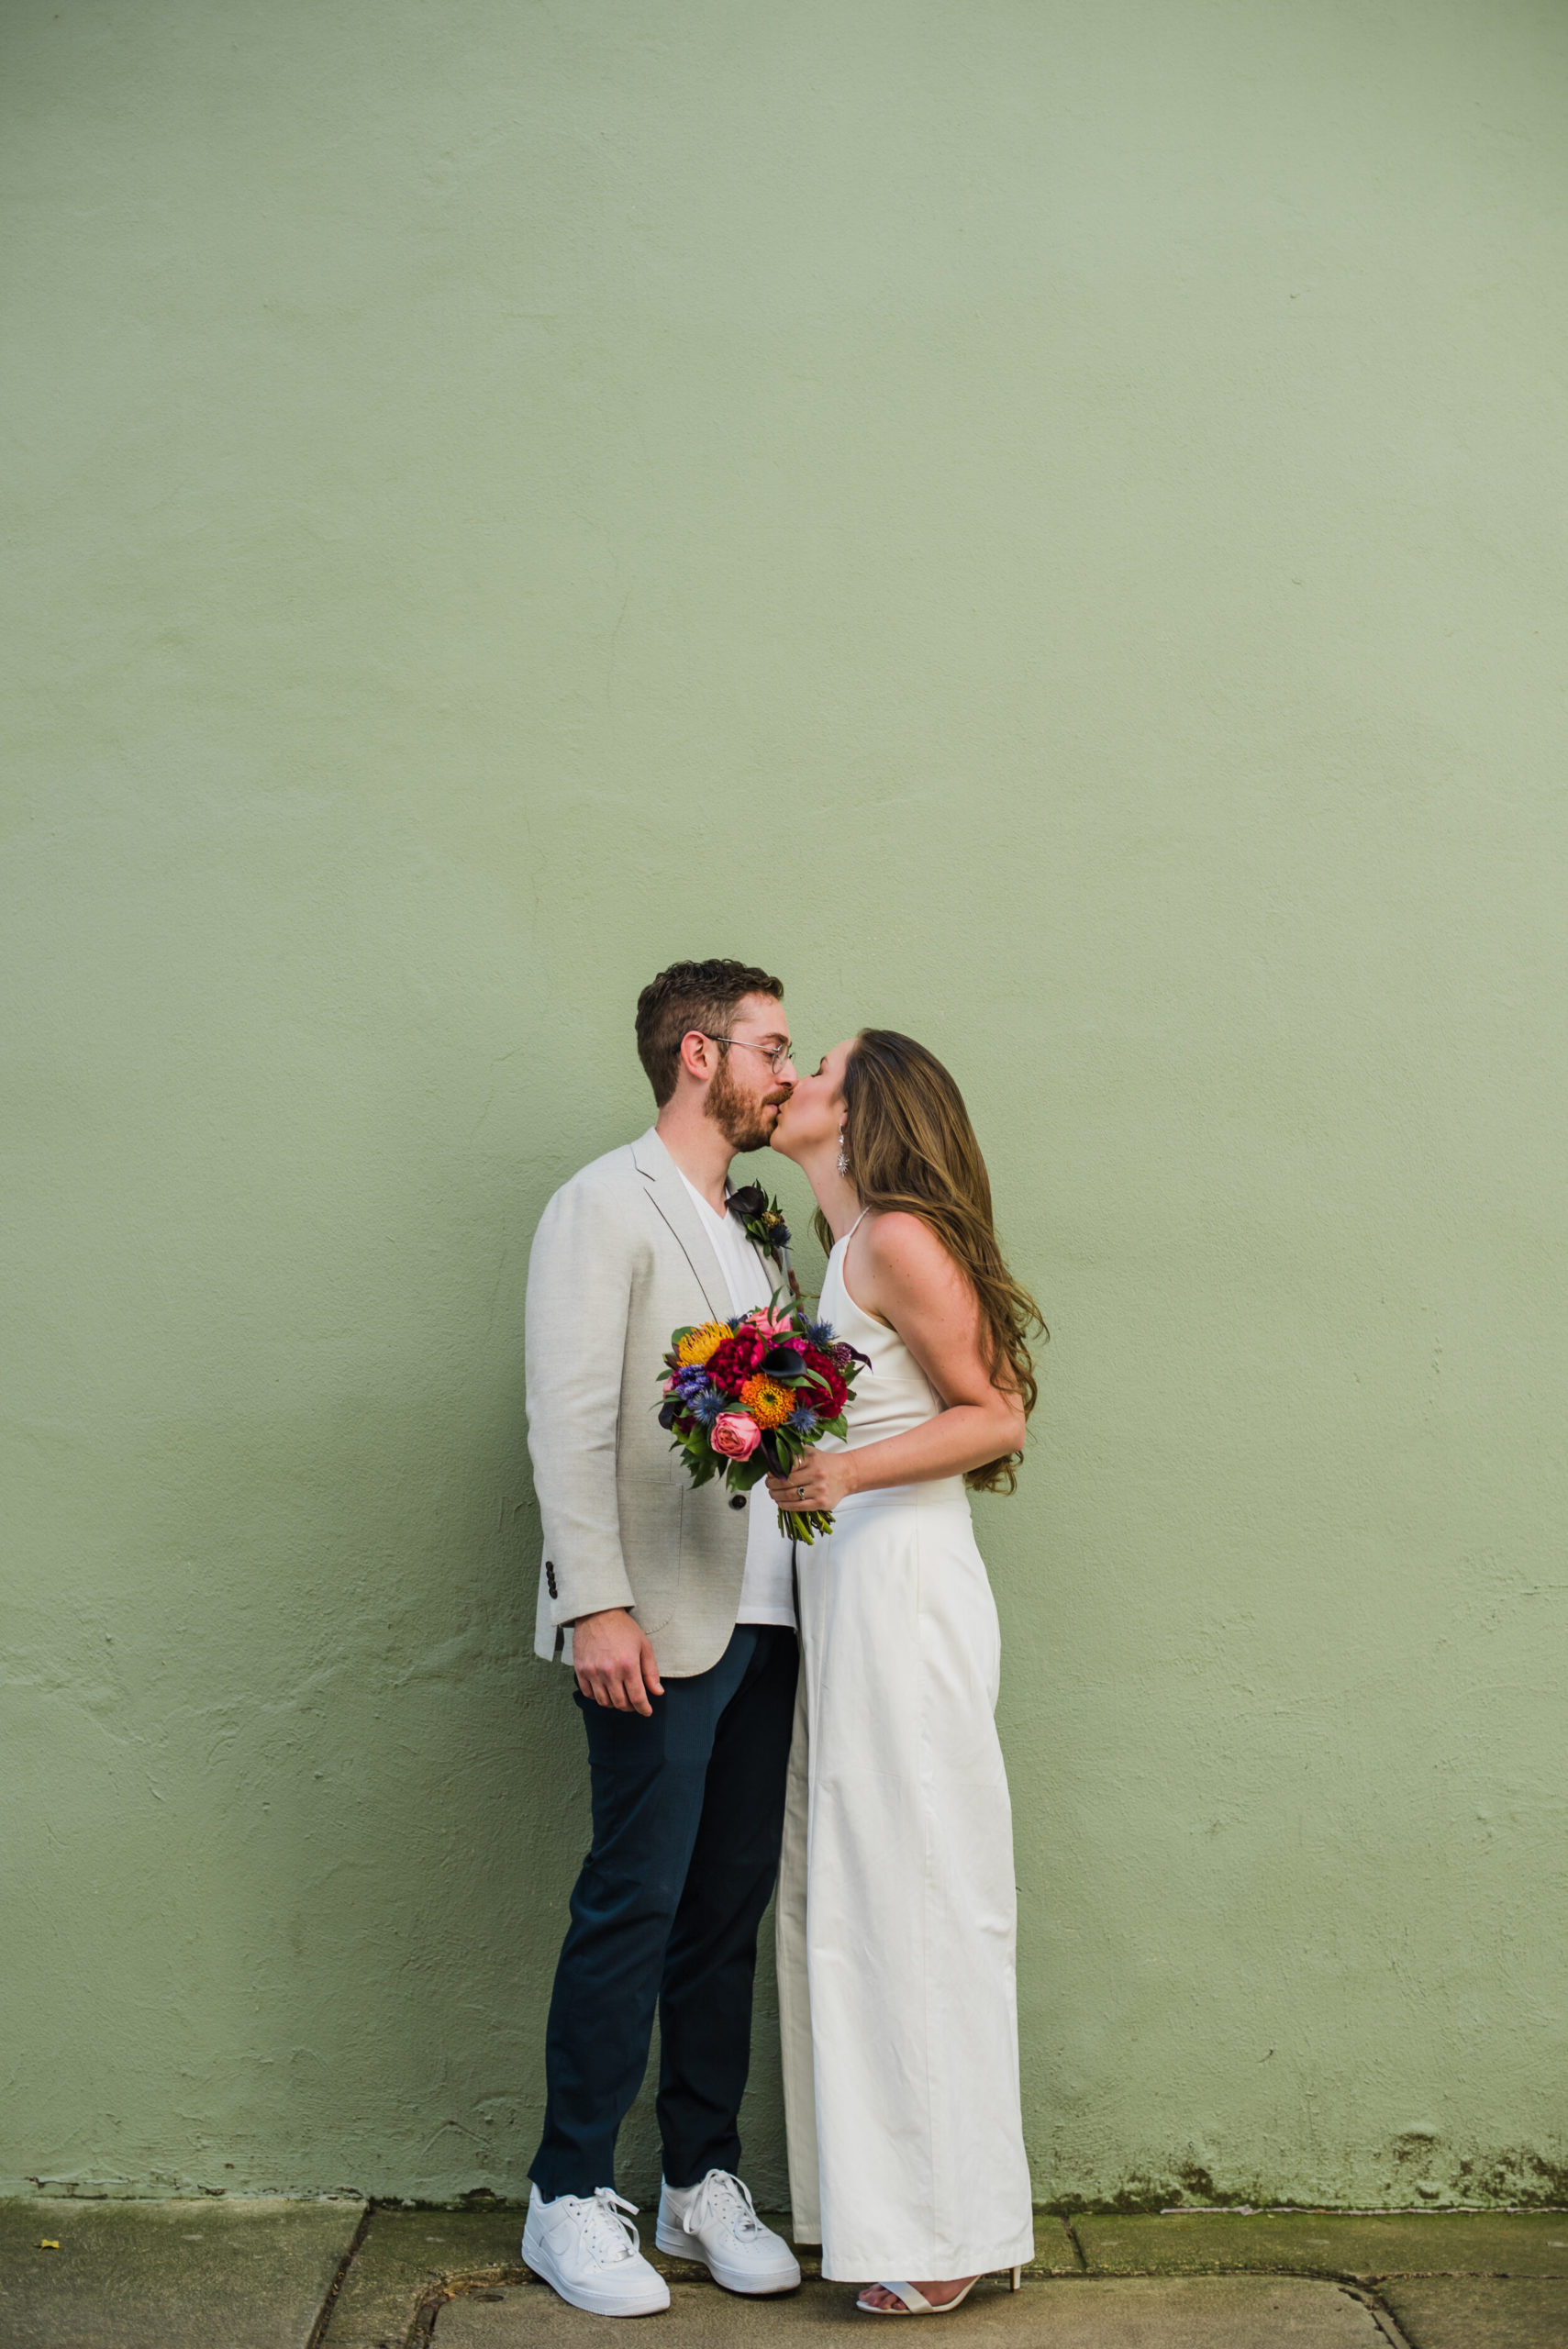 Wedding couple kissing in front of a pale green wall.